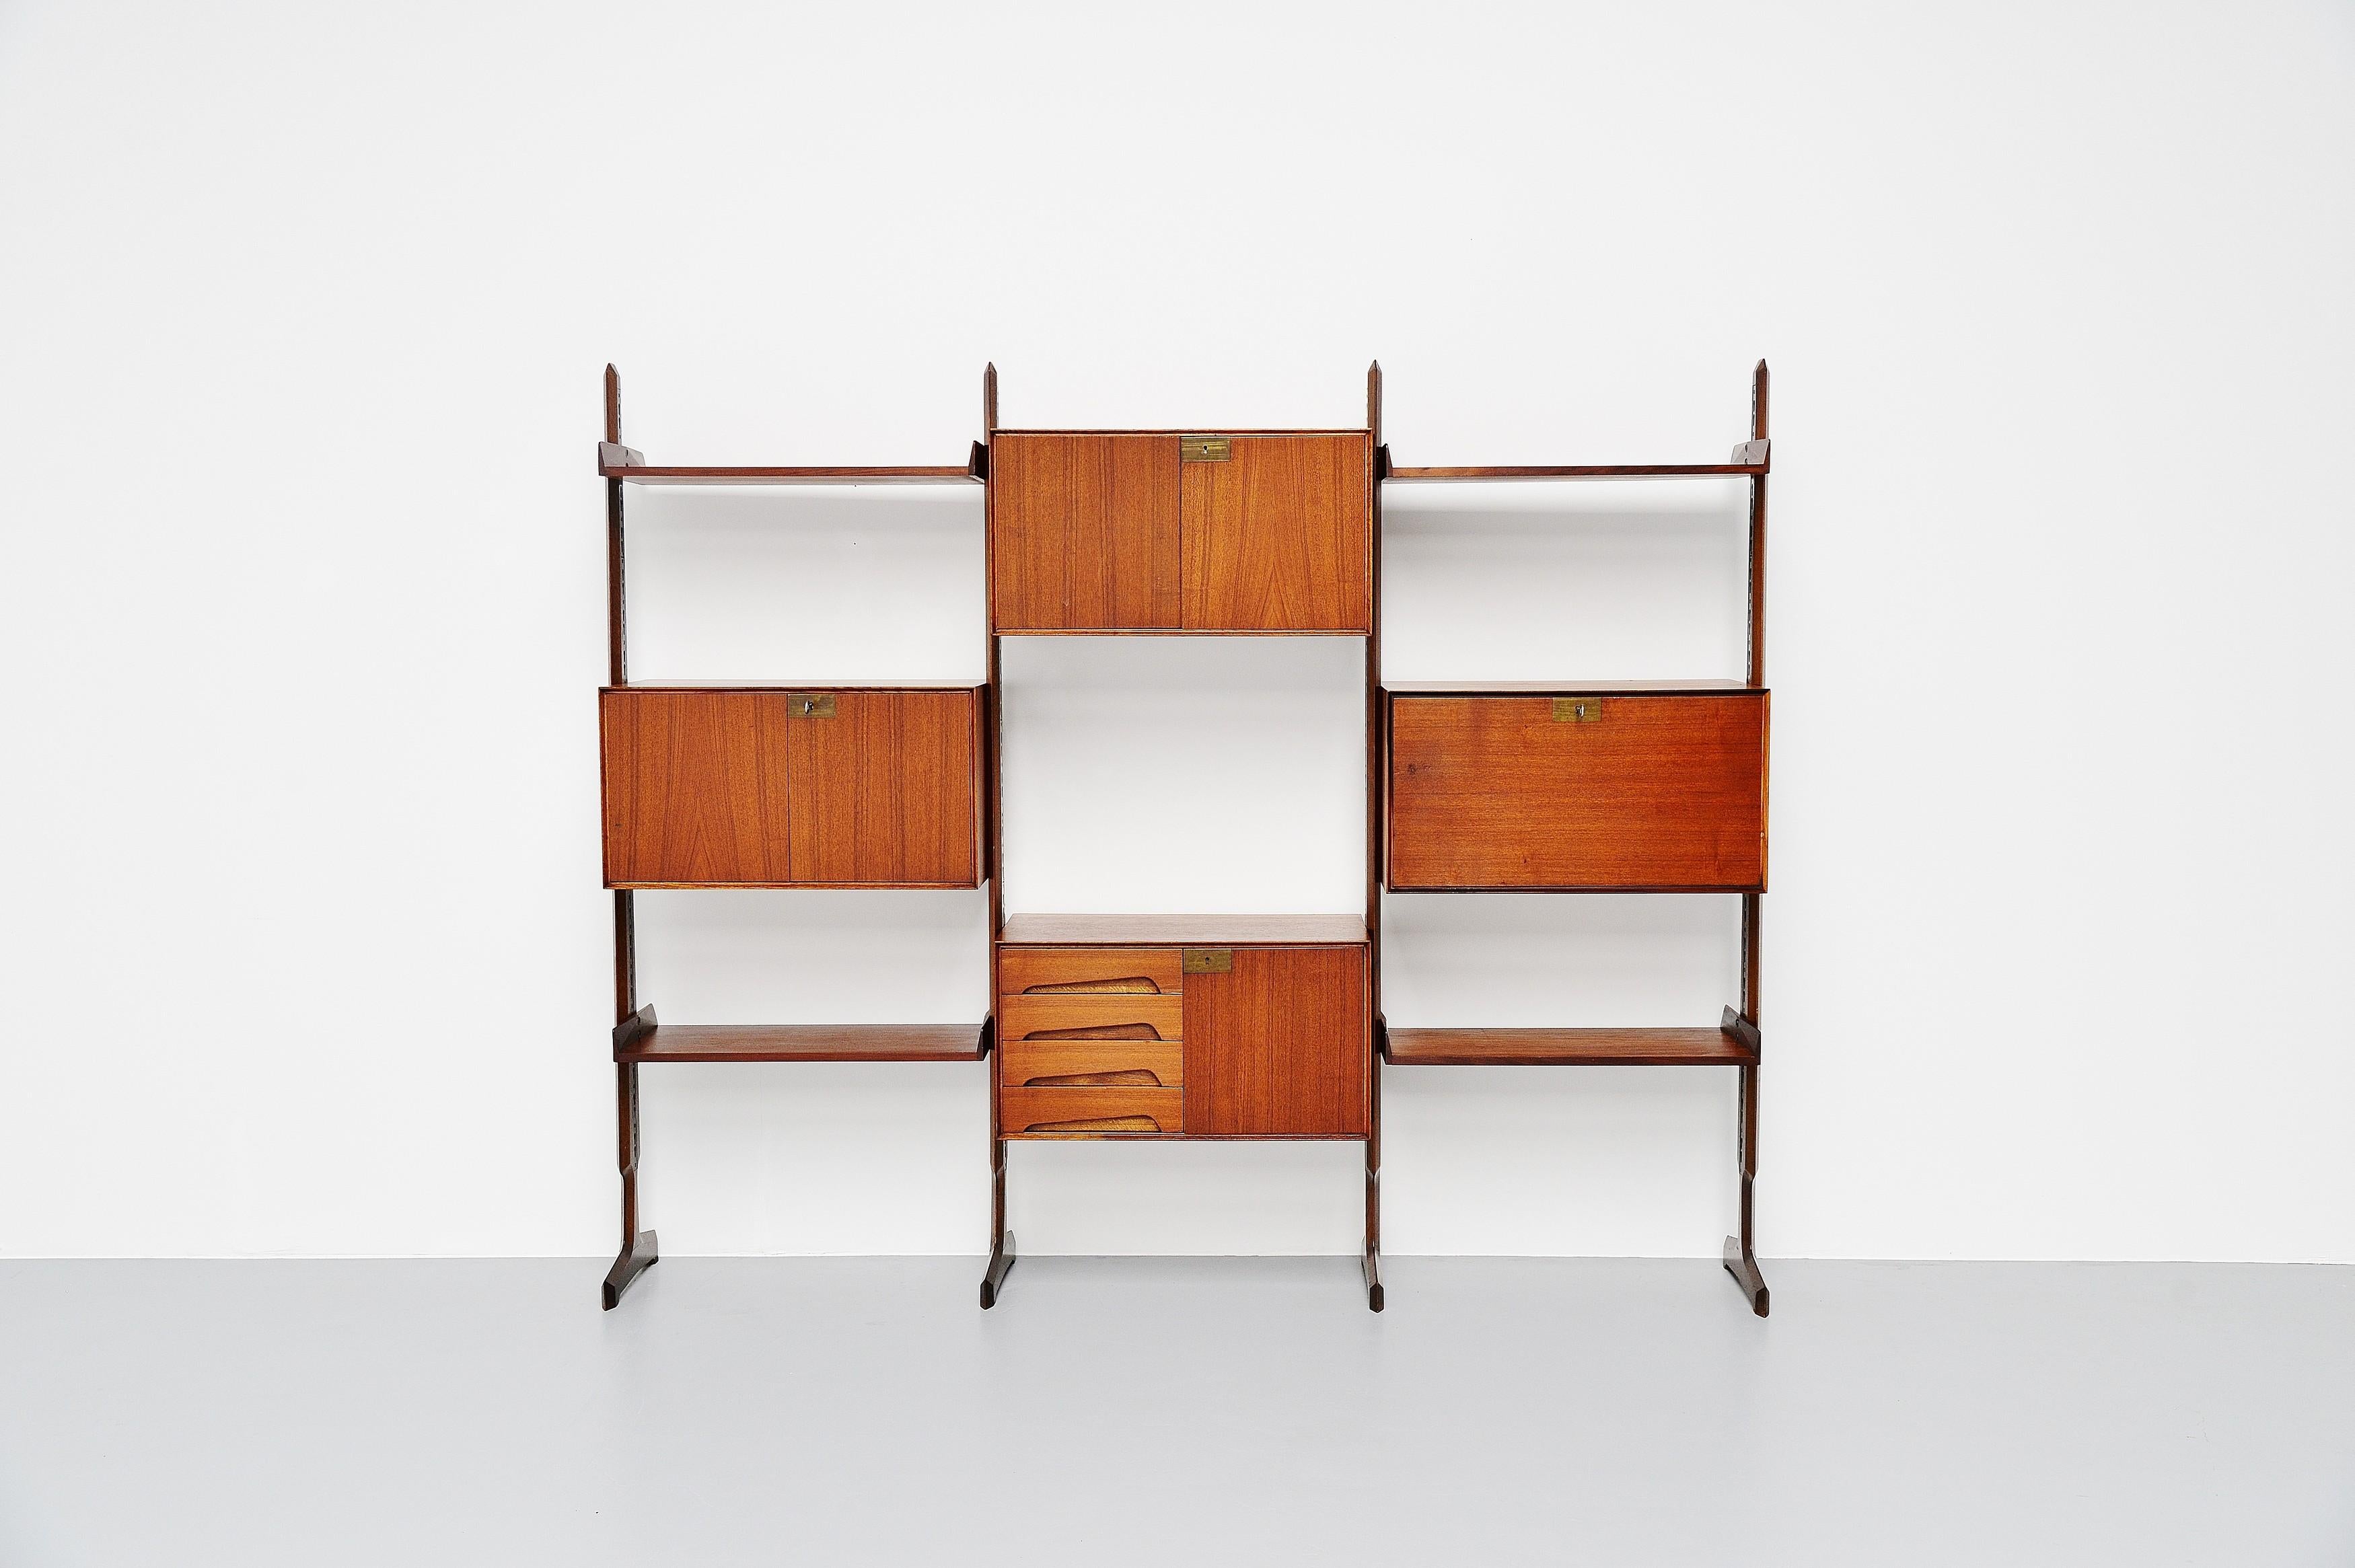 Very nice and elegant free standing shelving unit / bookcase designed by Edmondo Palutari and manufactured by Vittorio Dassi, Italy, 1950. This very nice free standing shelving unit was made of teak veneer and has several shelves and cabinets to